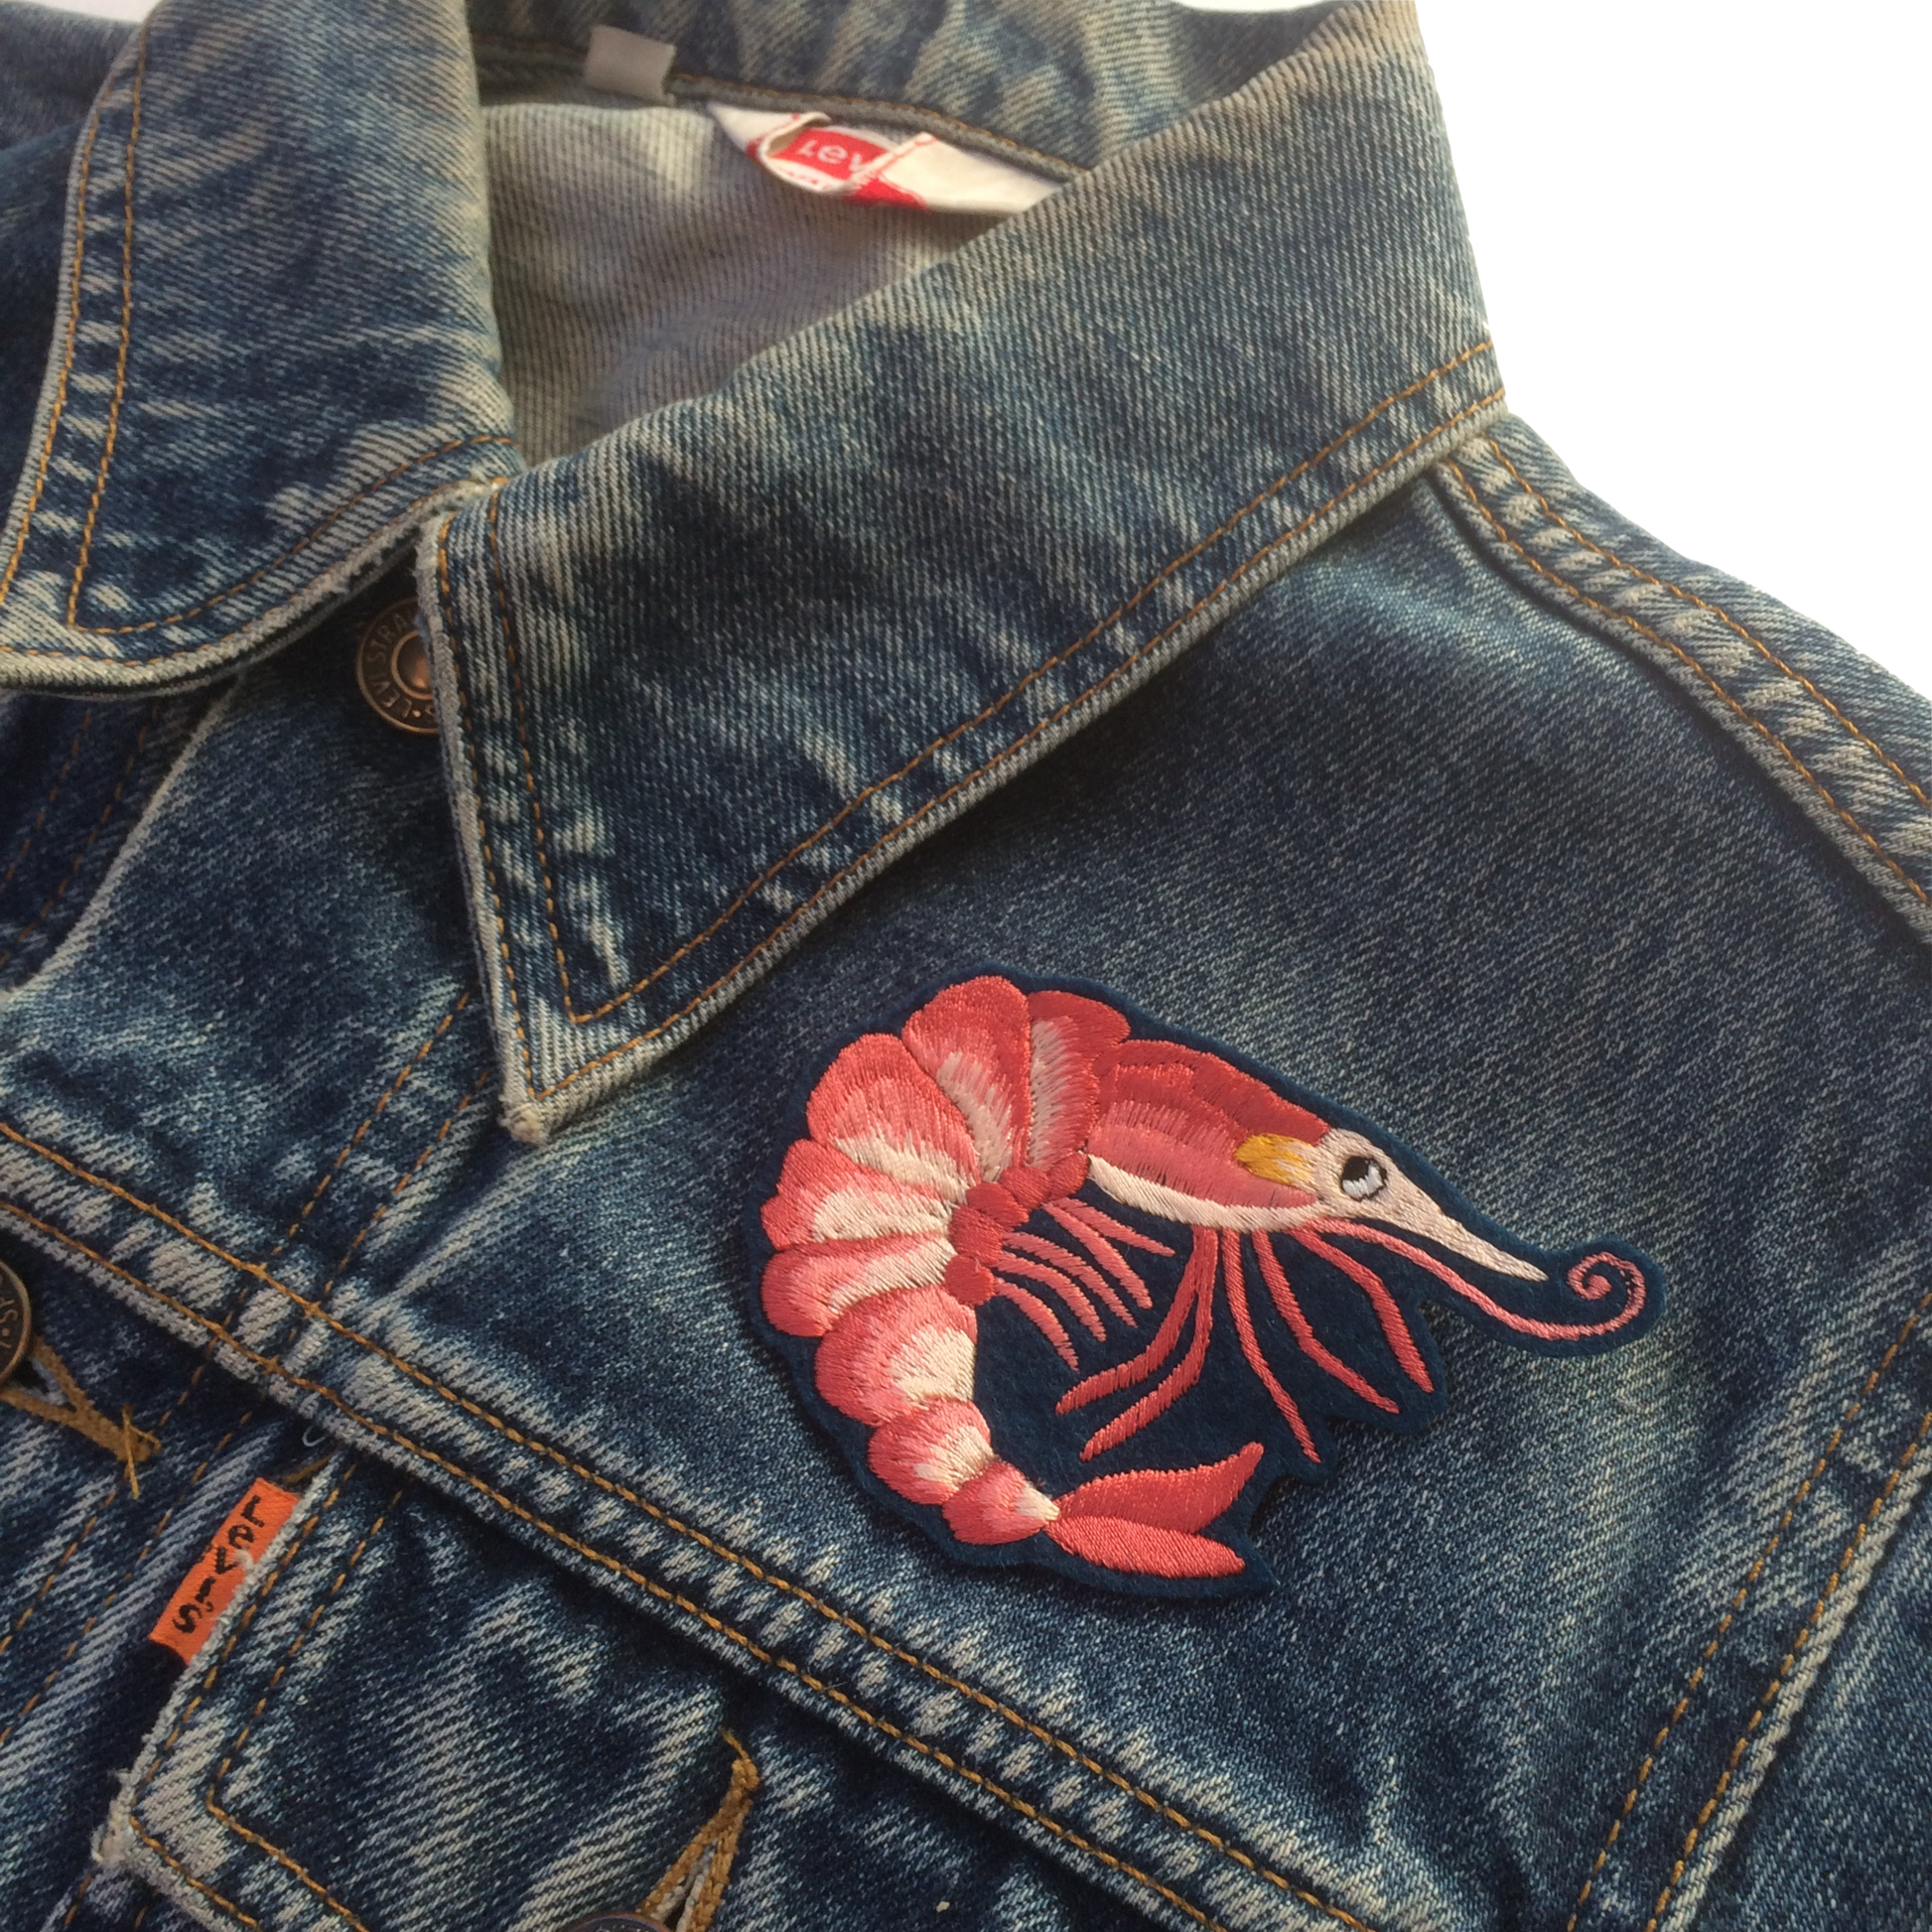 Prawn embroidered patch shown on the front shoulder of a denim jacket